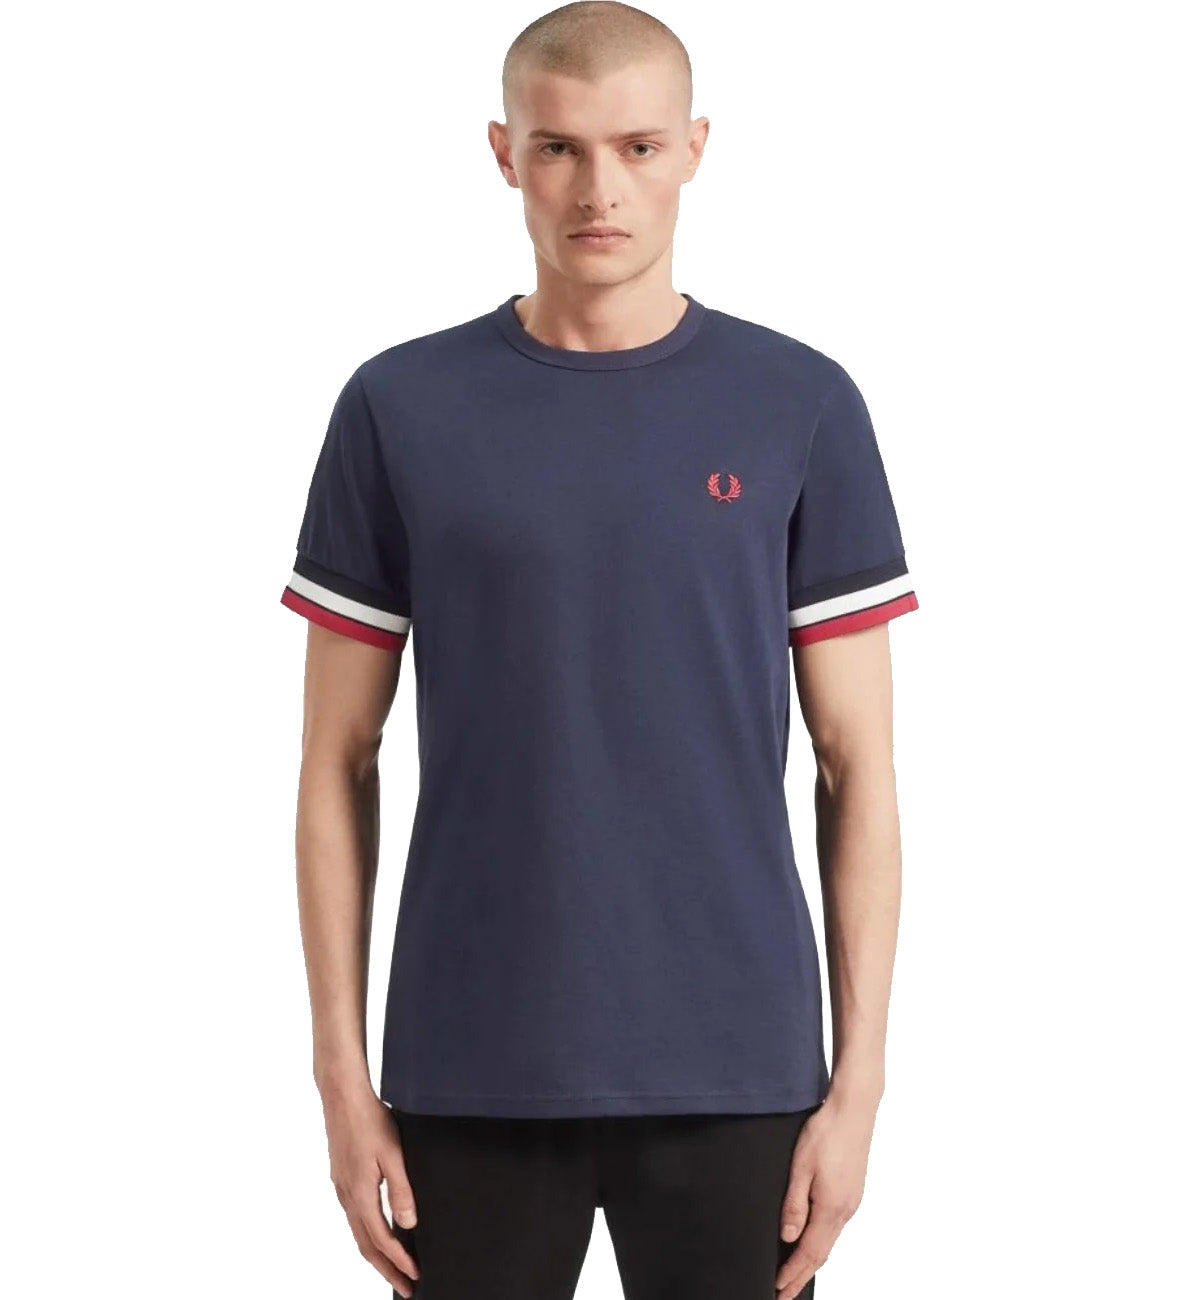 Fred Perry Navy Shirt with White Red Stripe T-Shirt